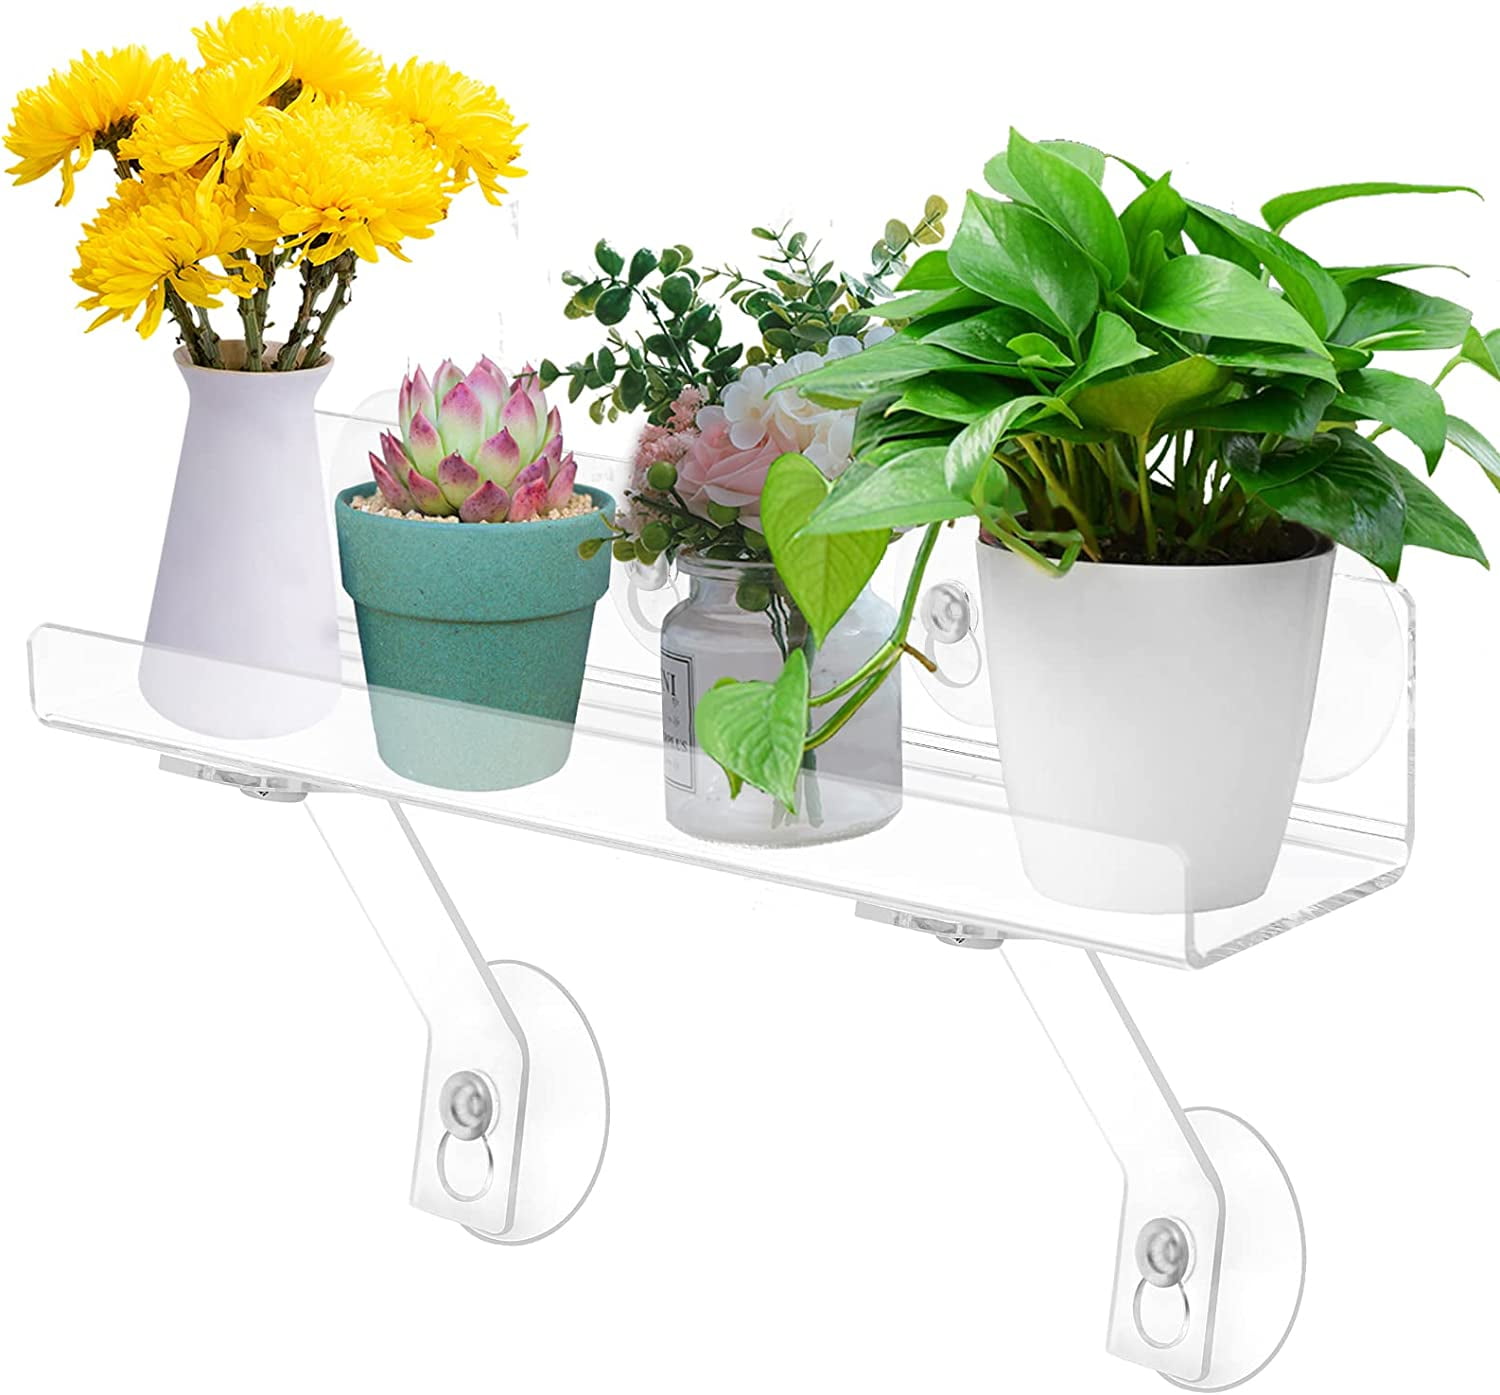  Suction Cup Shelf for Plants Window, 15 Inch Window Shelf for  Plants, Acrylic Window Sill Extender for Plants, Window Plant Shelves, for  Succulent Planters, Herb Pots, Indoor Plants : Patio, Lawn